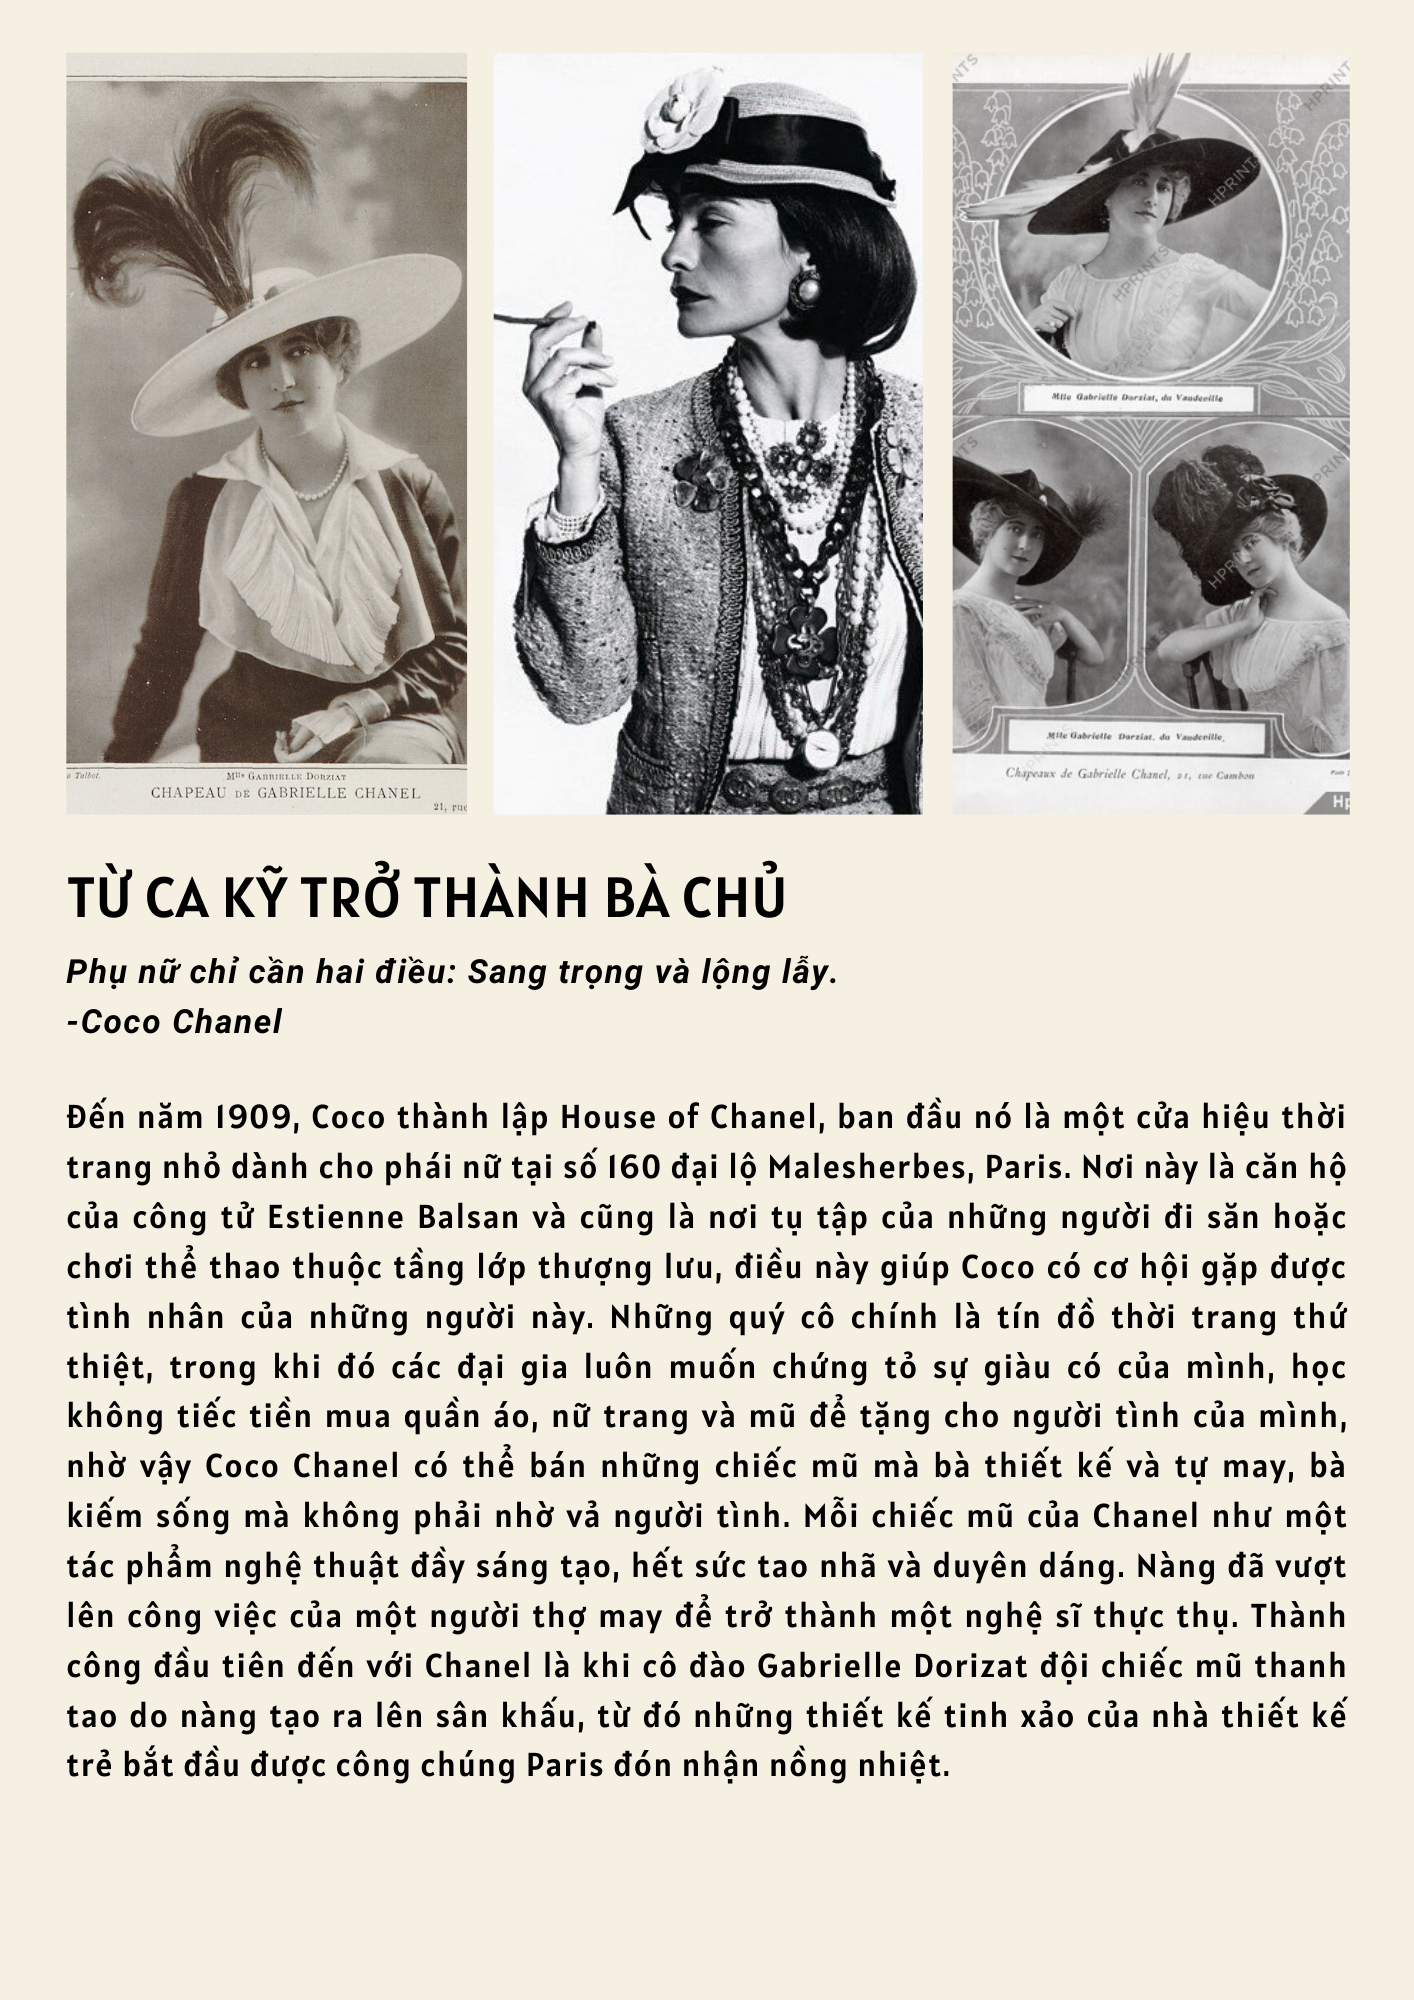 1/coco-chanel-nguoi-dinh-hinh-lai-thoi-trang-the-gioi-3_04072020110333508_nq3unlix.p1r.png